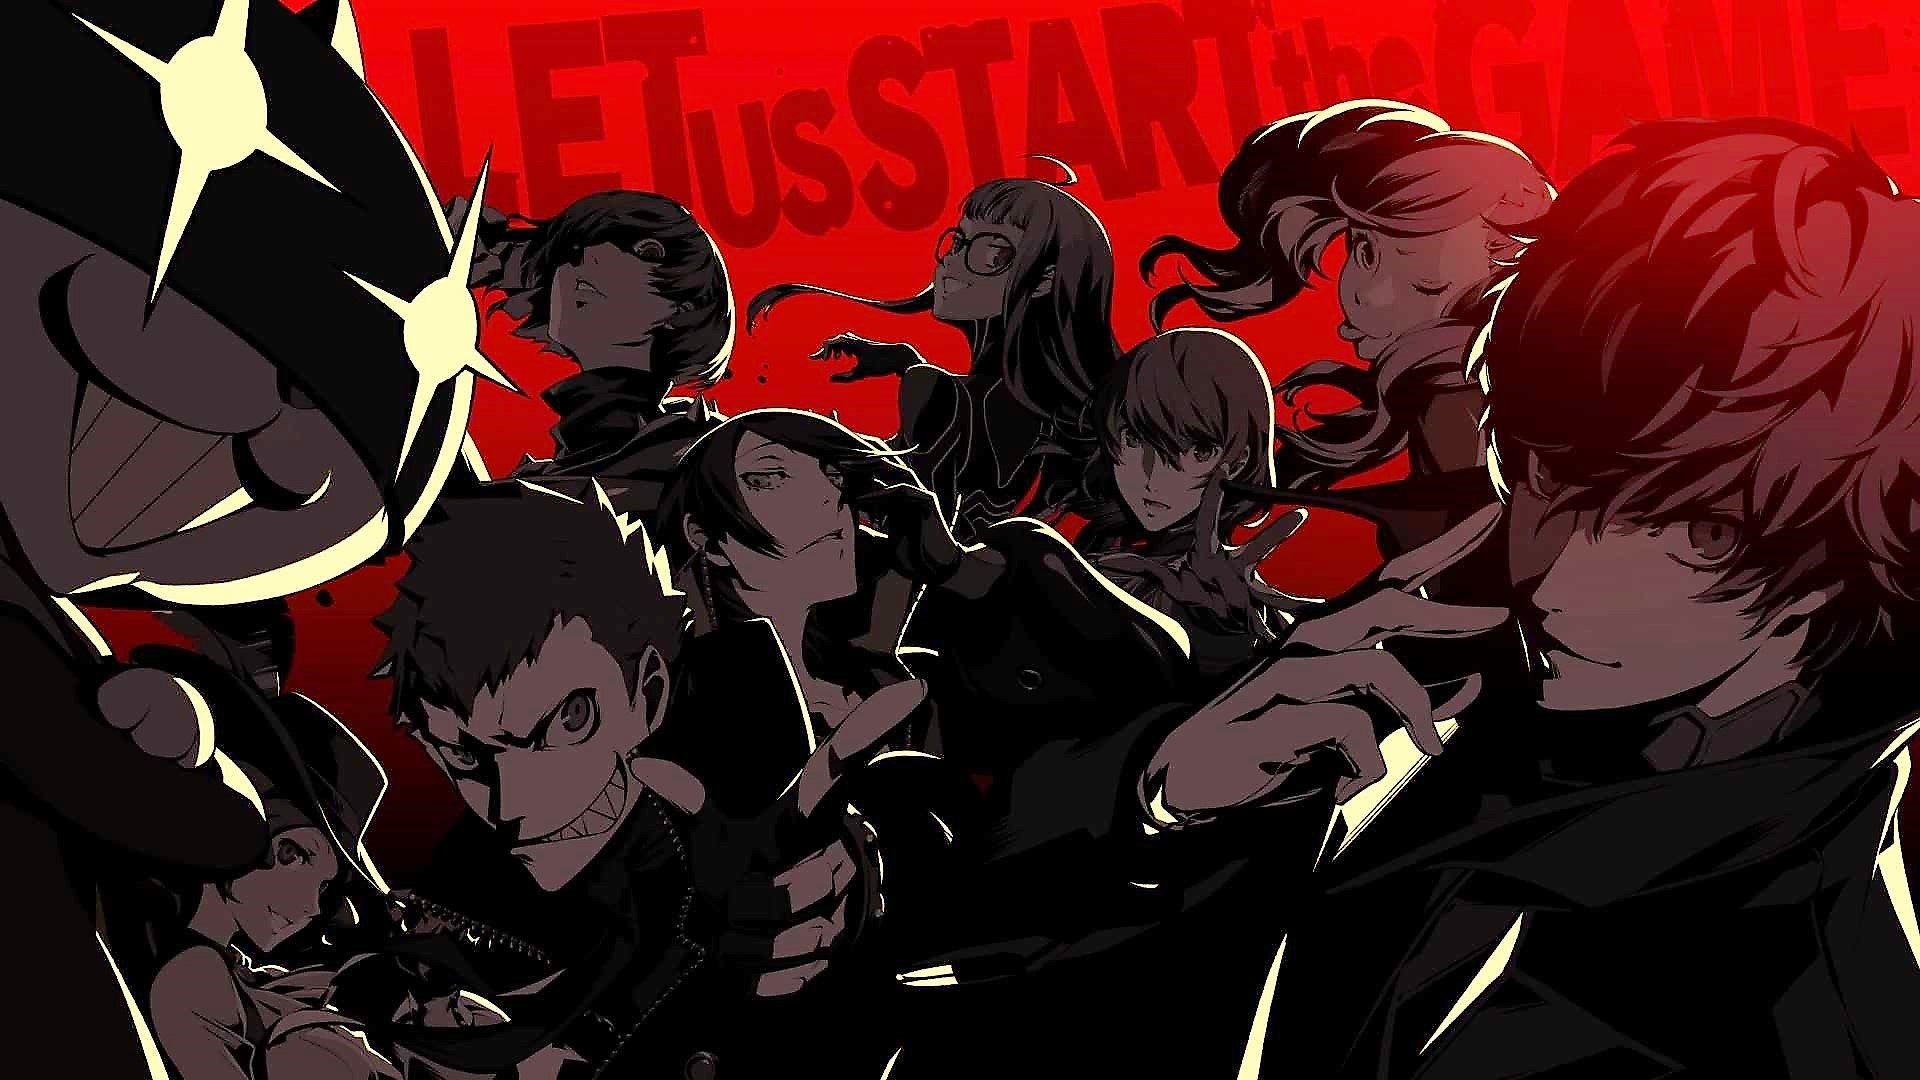 Poll: Has Persona 5 Been Worth the Hype?